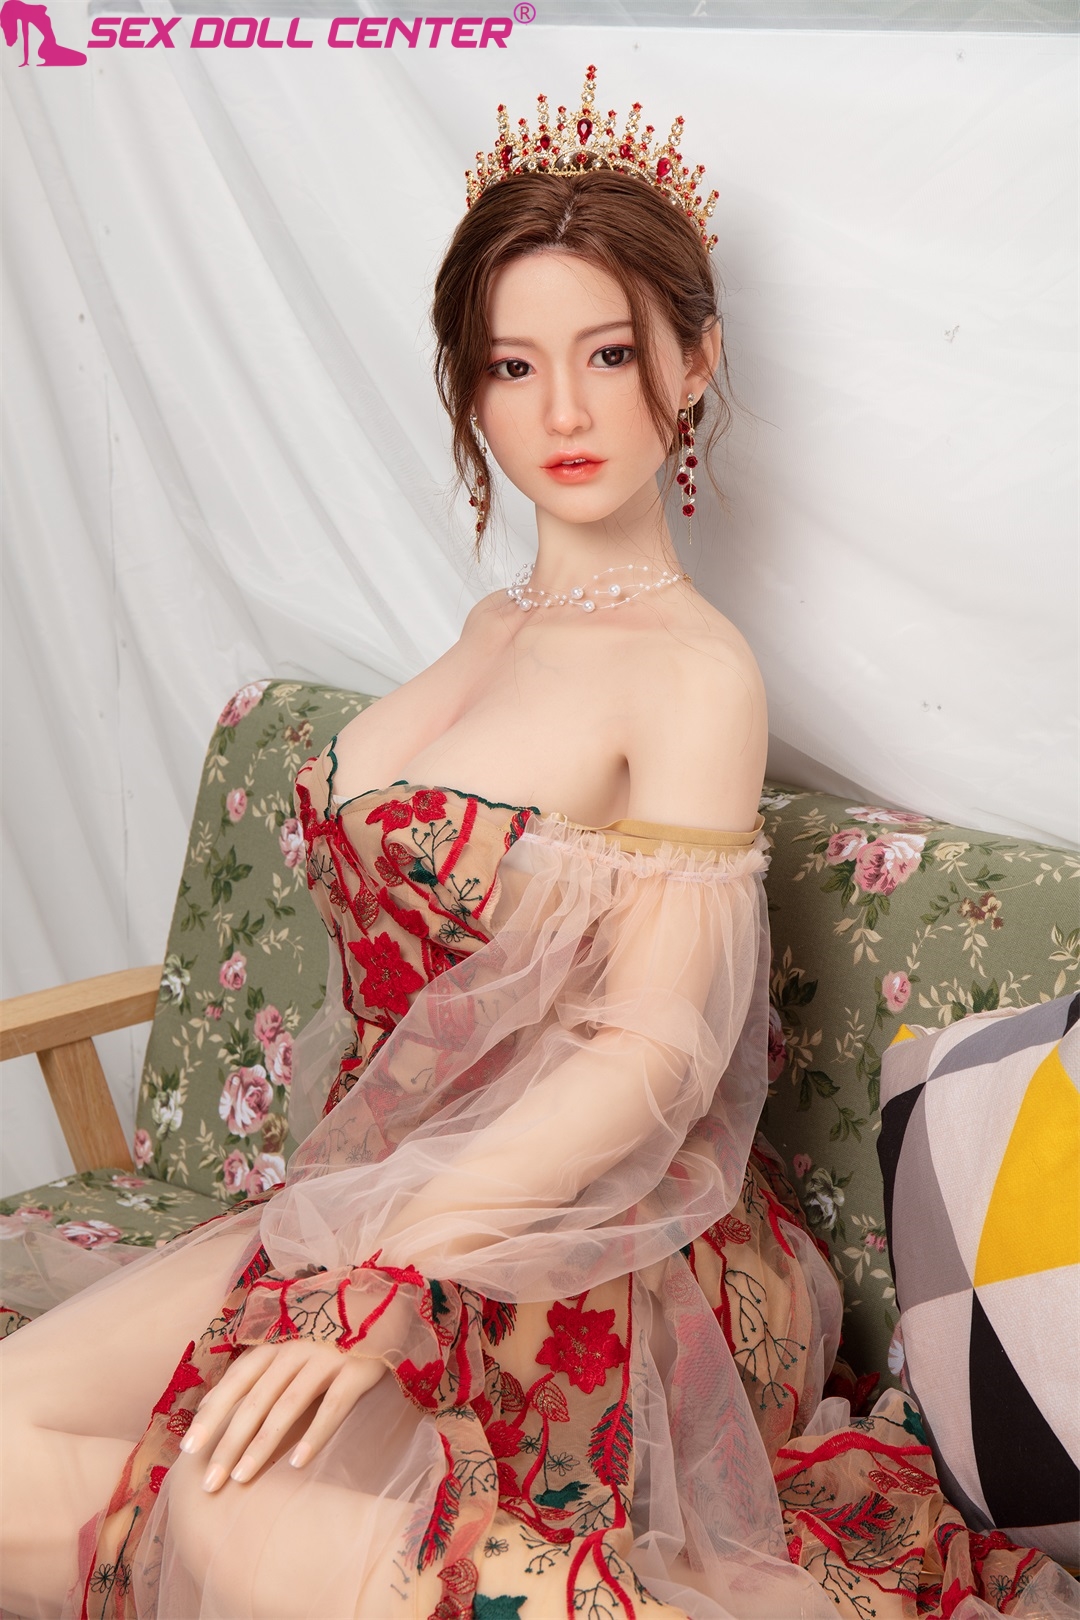 JX Doll | Filbey- 5ft 7/170cm Japanese Style Elegant Ultra Realistic Silicone Sex Doll